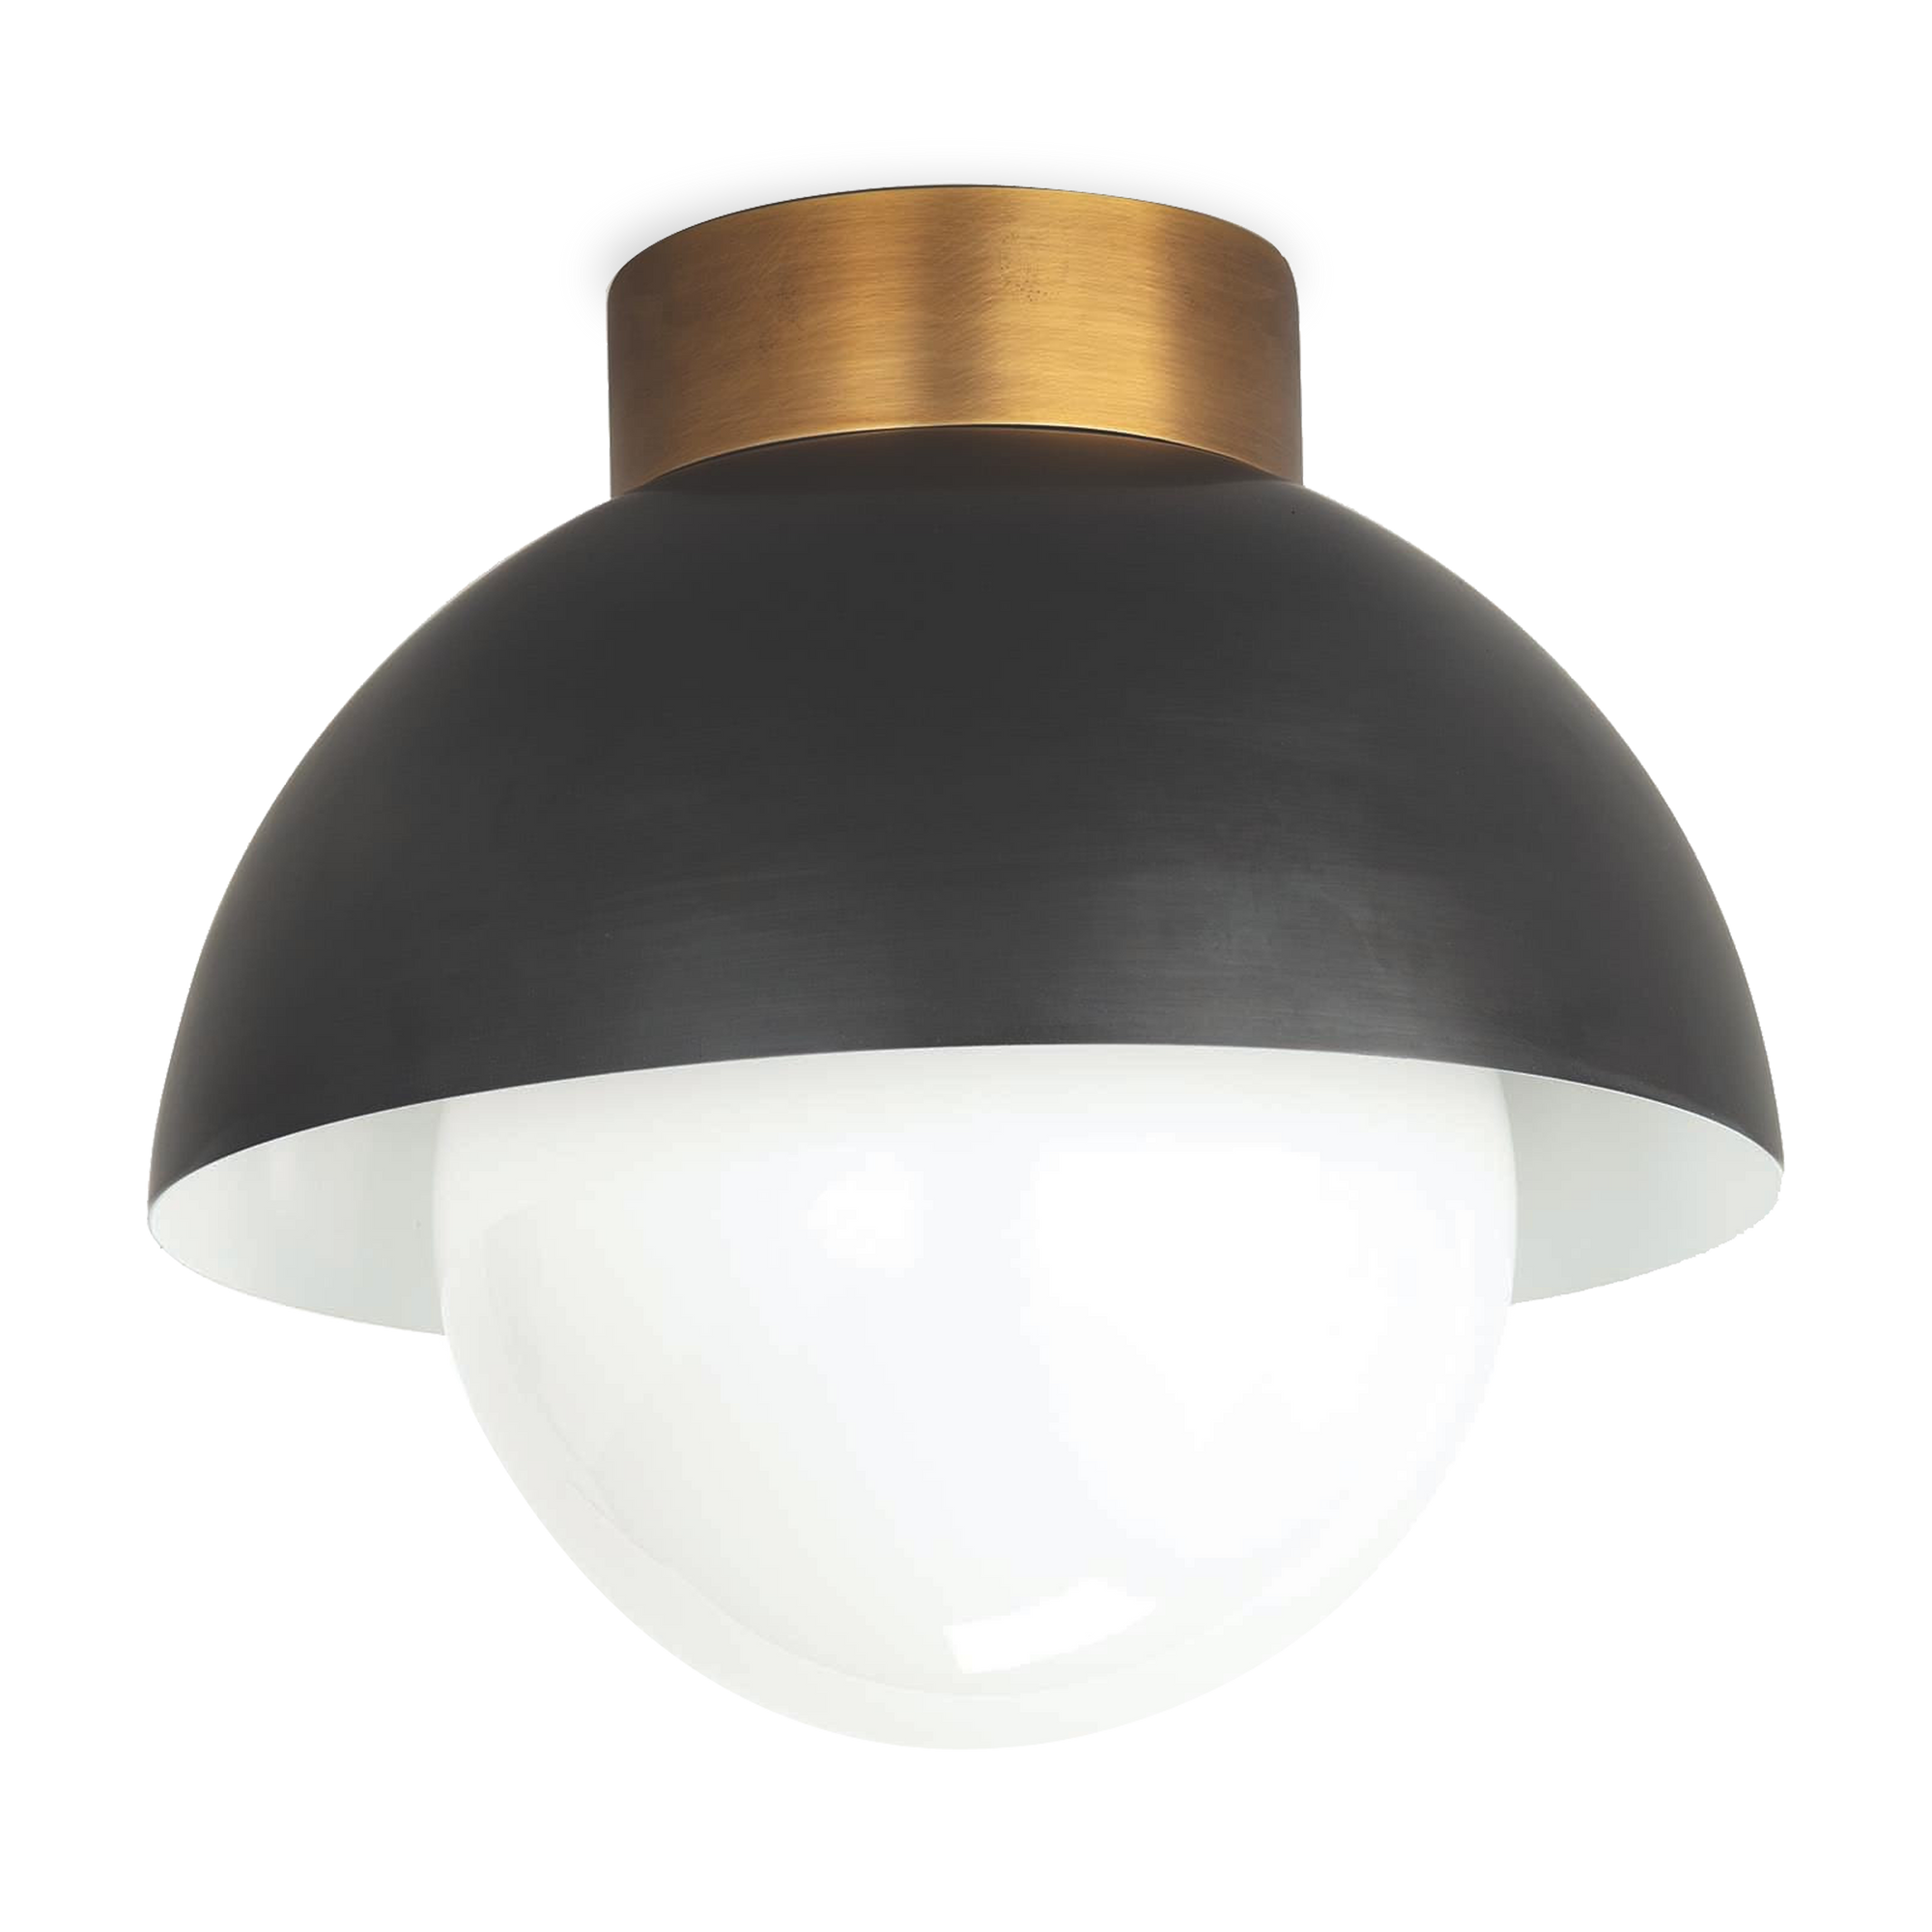 Our Montreux Flush Mount has a beautiful, minimalistic silhouette with its metal shade and the large, milk glass globe creates a soft glow when illuminated.